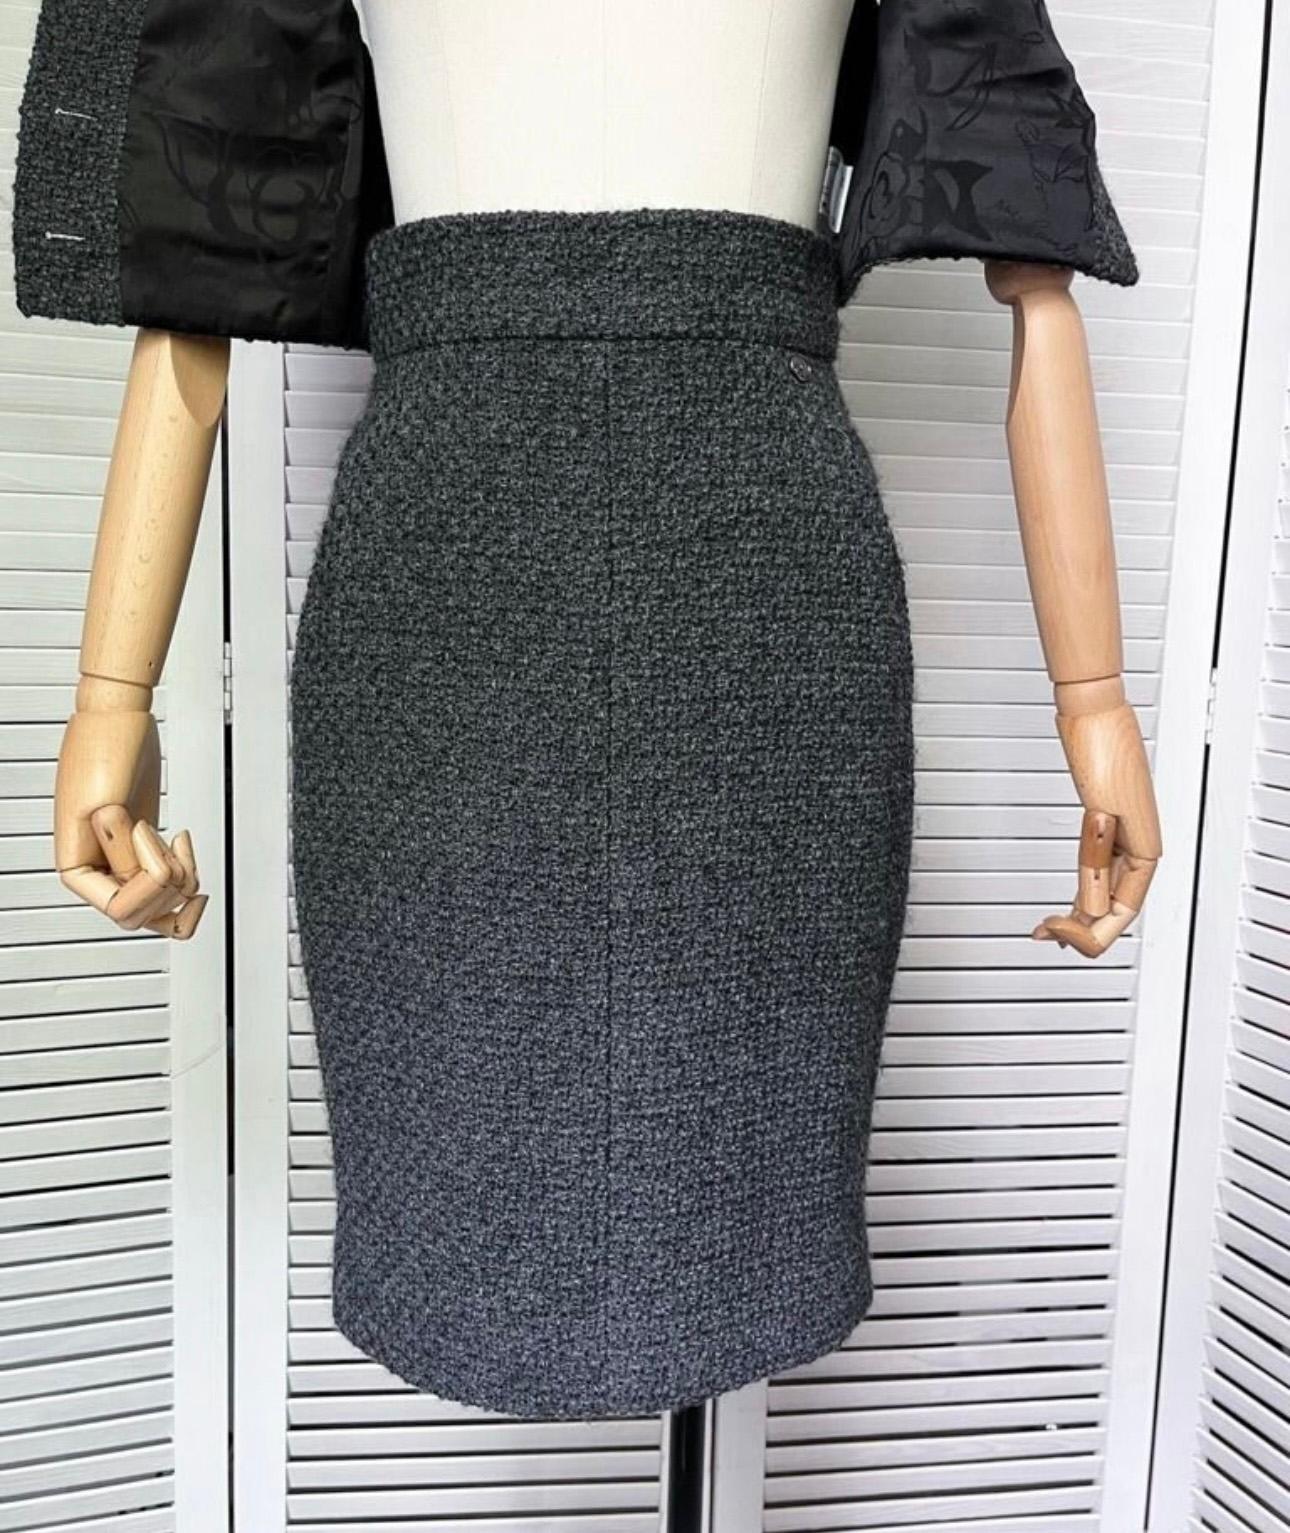 Chanel New CC Buttons Black Tweed Vest and Skirt Ensemble 1